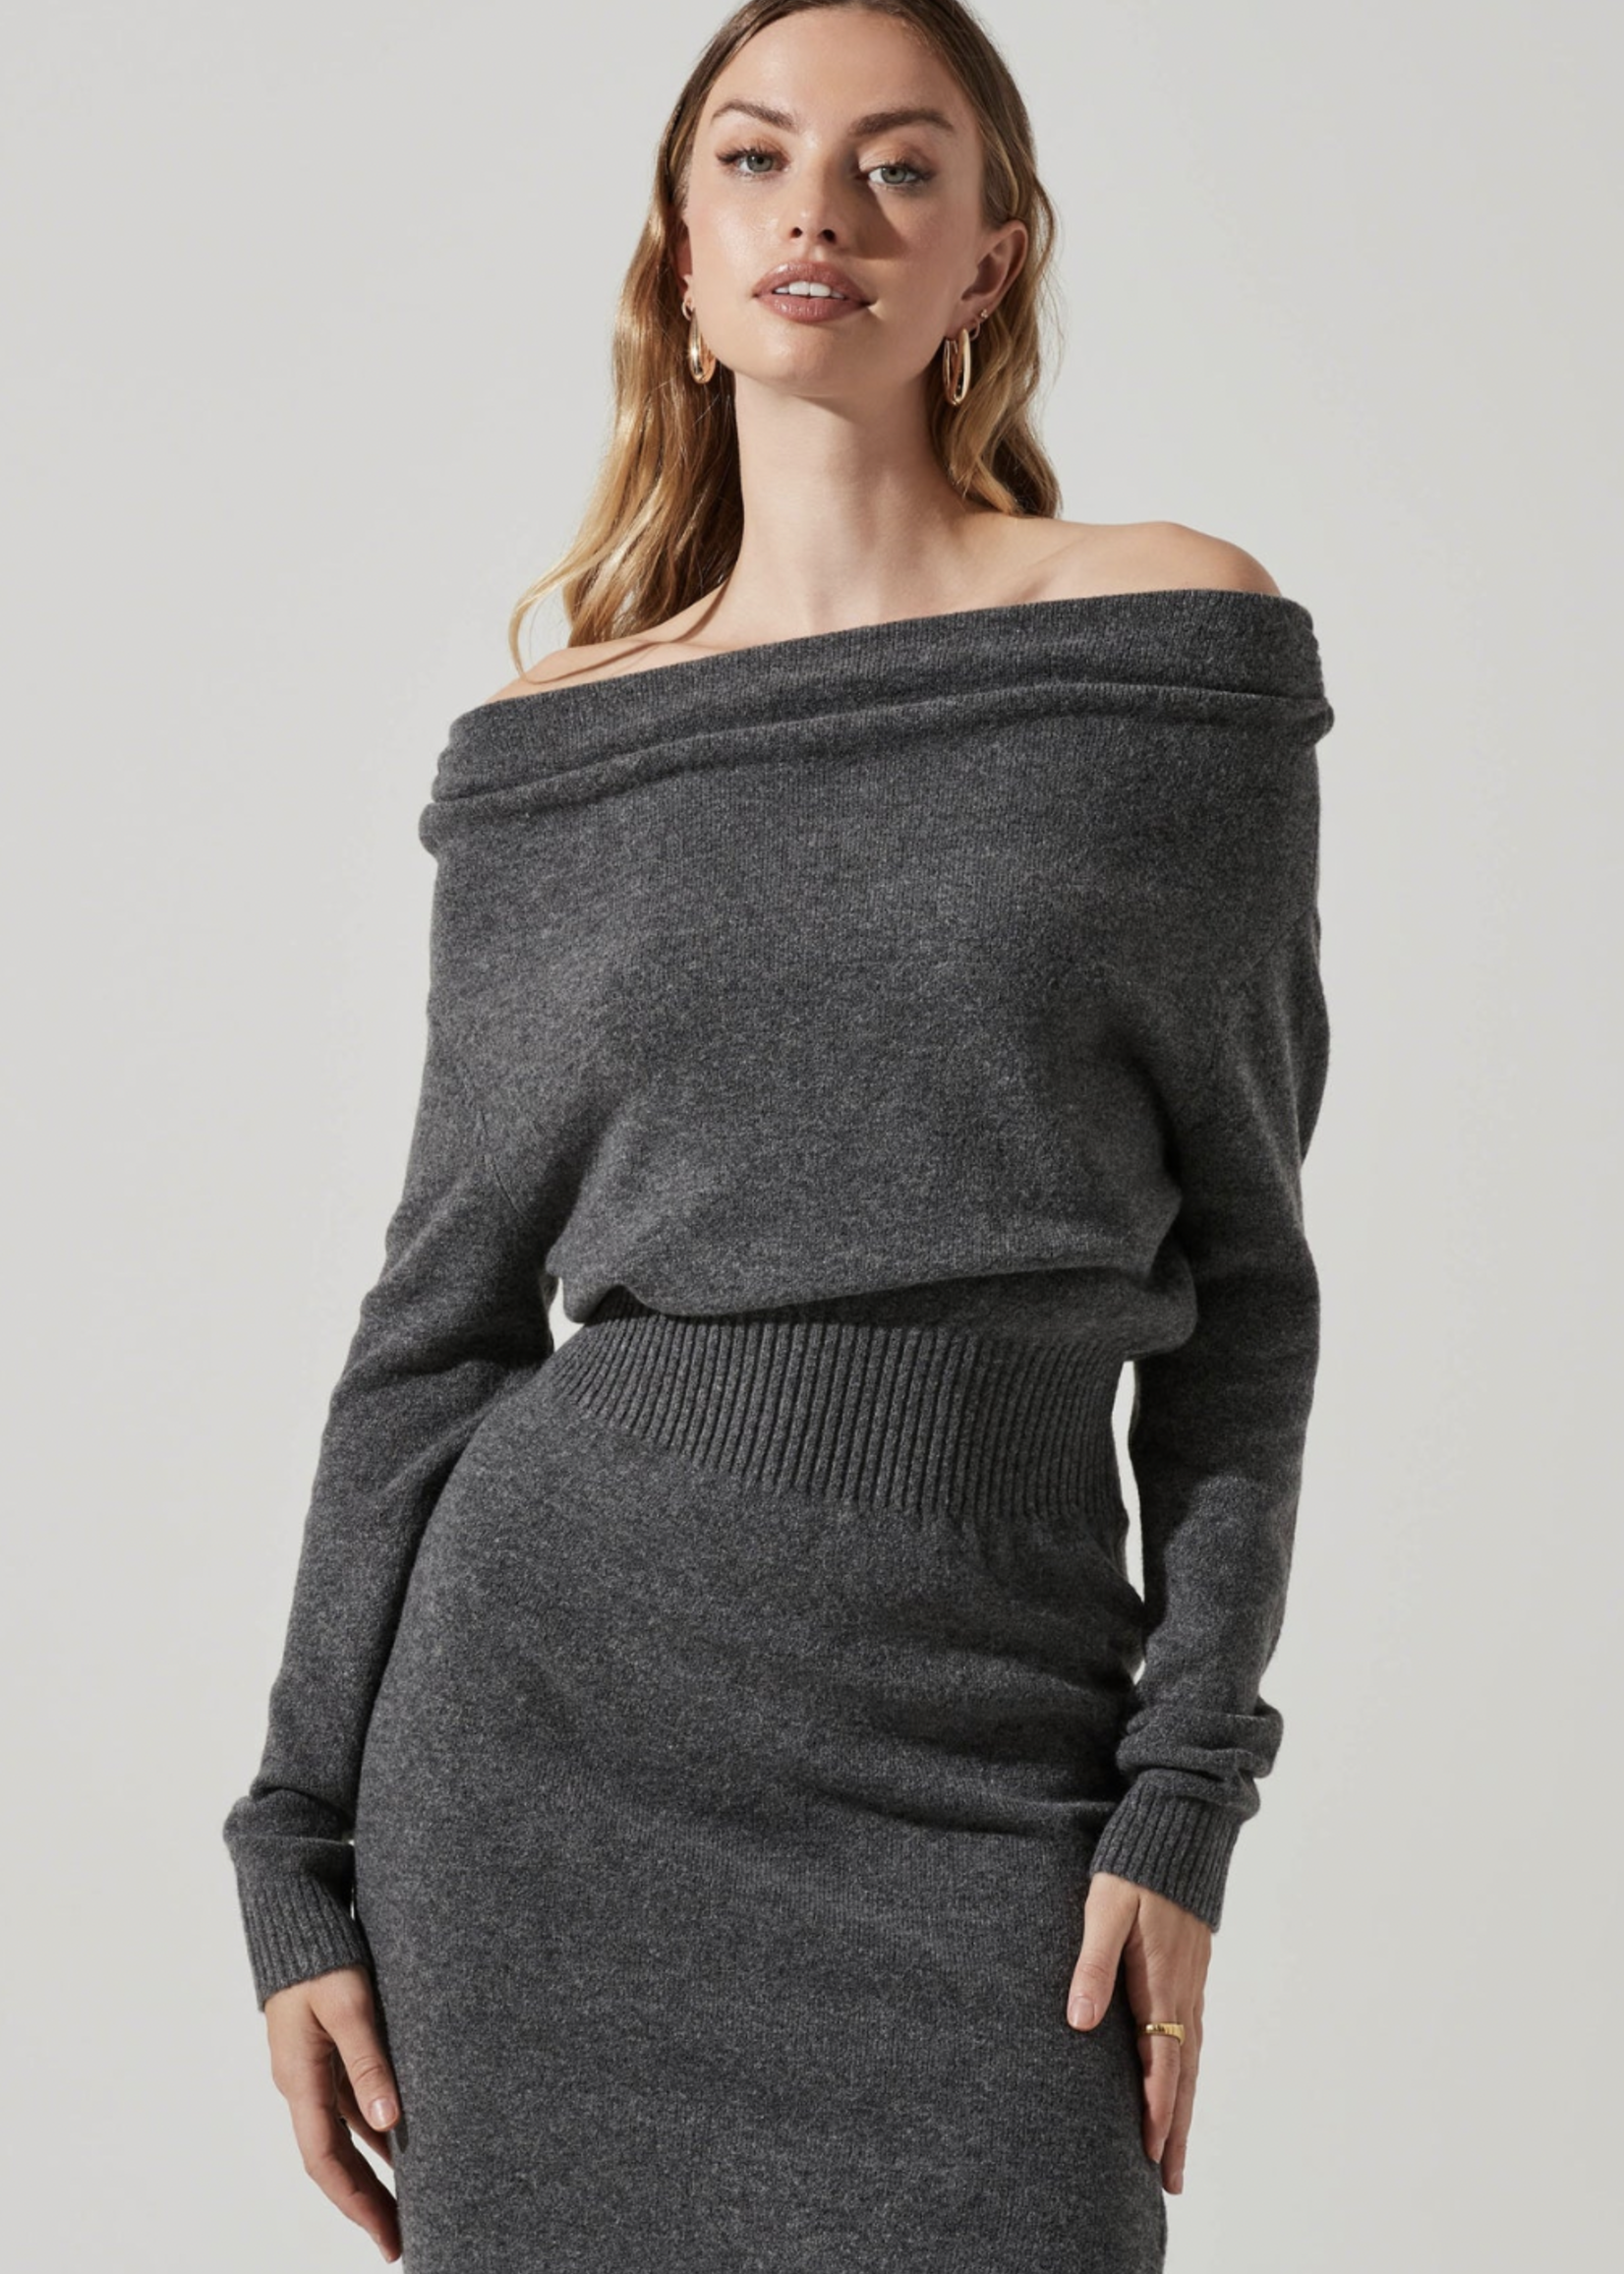 Charcoal Alpaca Tunic Sweater Dress, 'Long Lines in Charcoal